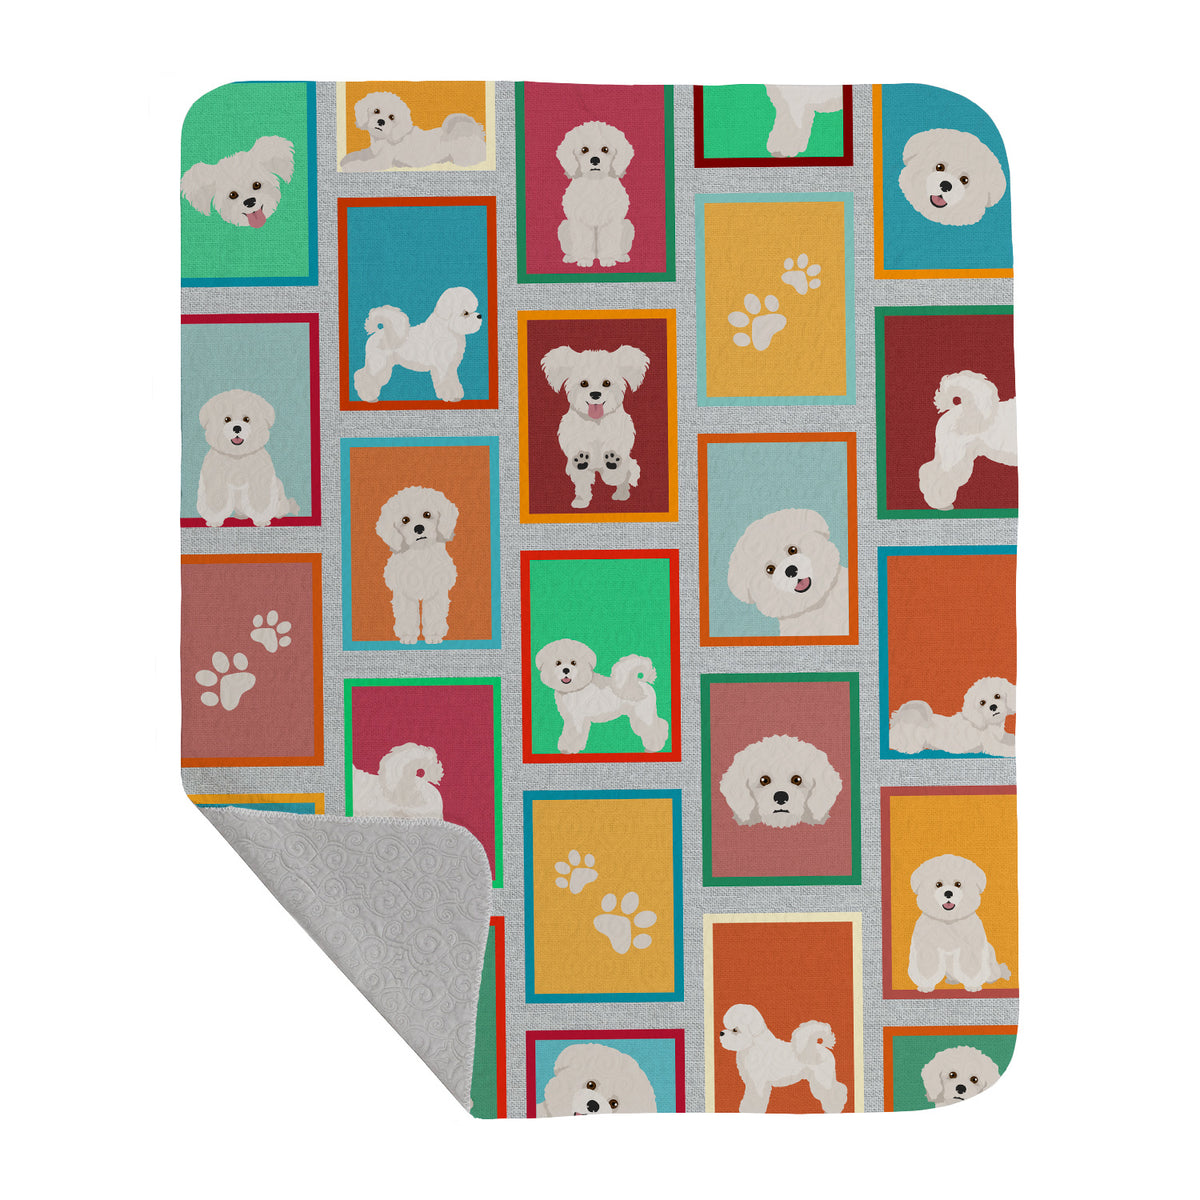 Buy this Lots of Bichon Frise Quilted Blanket 50x60